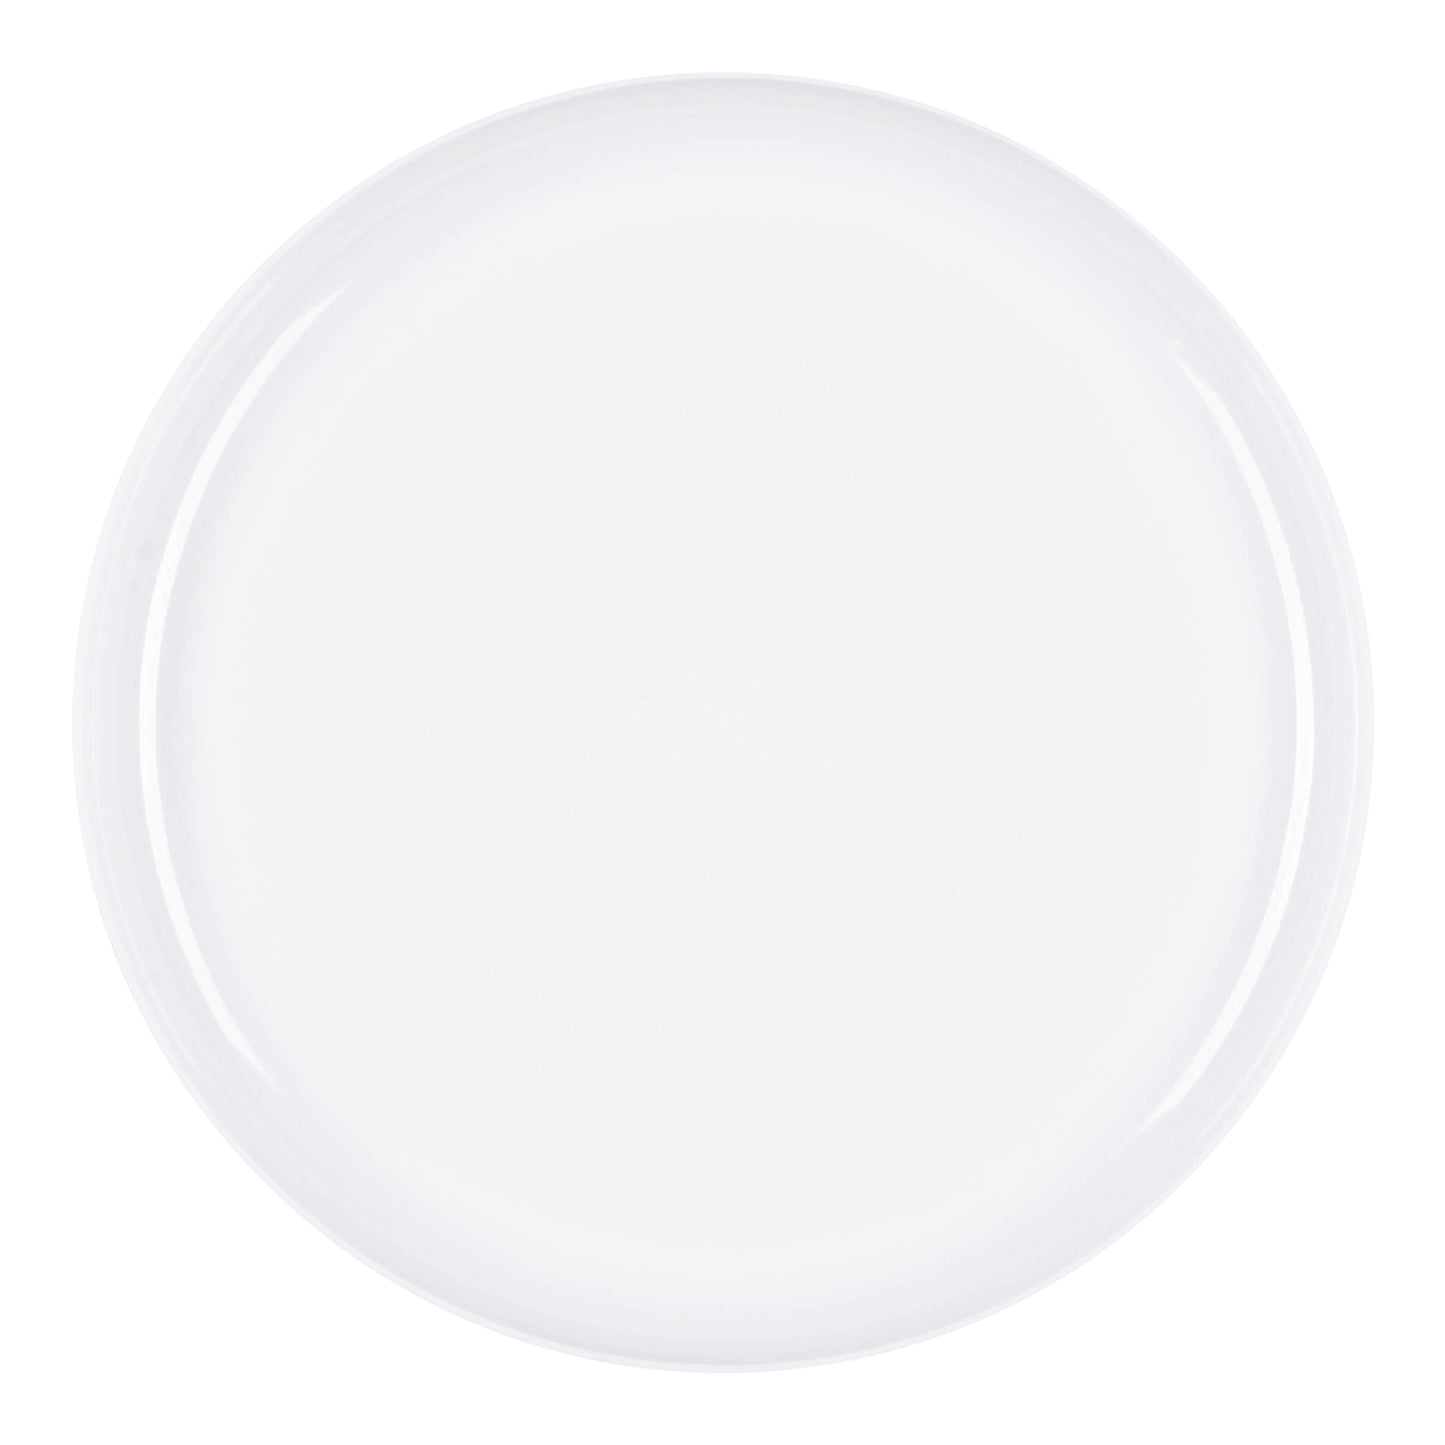 White Flat Round Disposable Plastic Pastry Plates (6.25") | The Kaya Collection